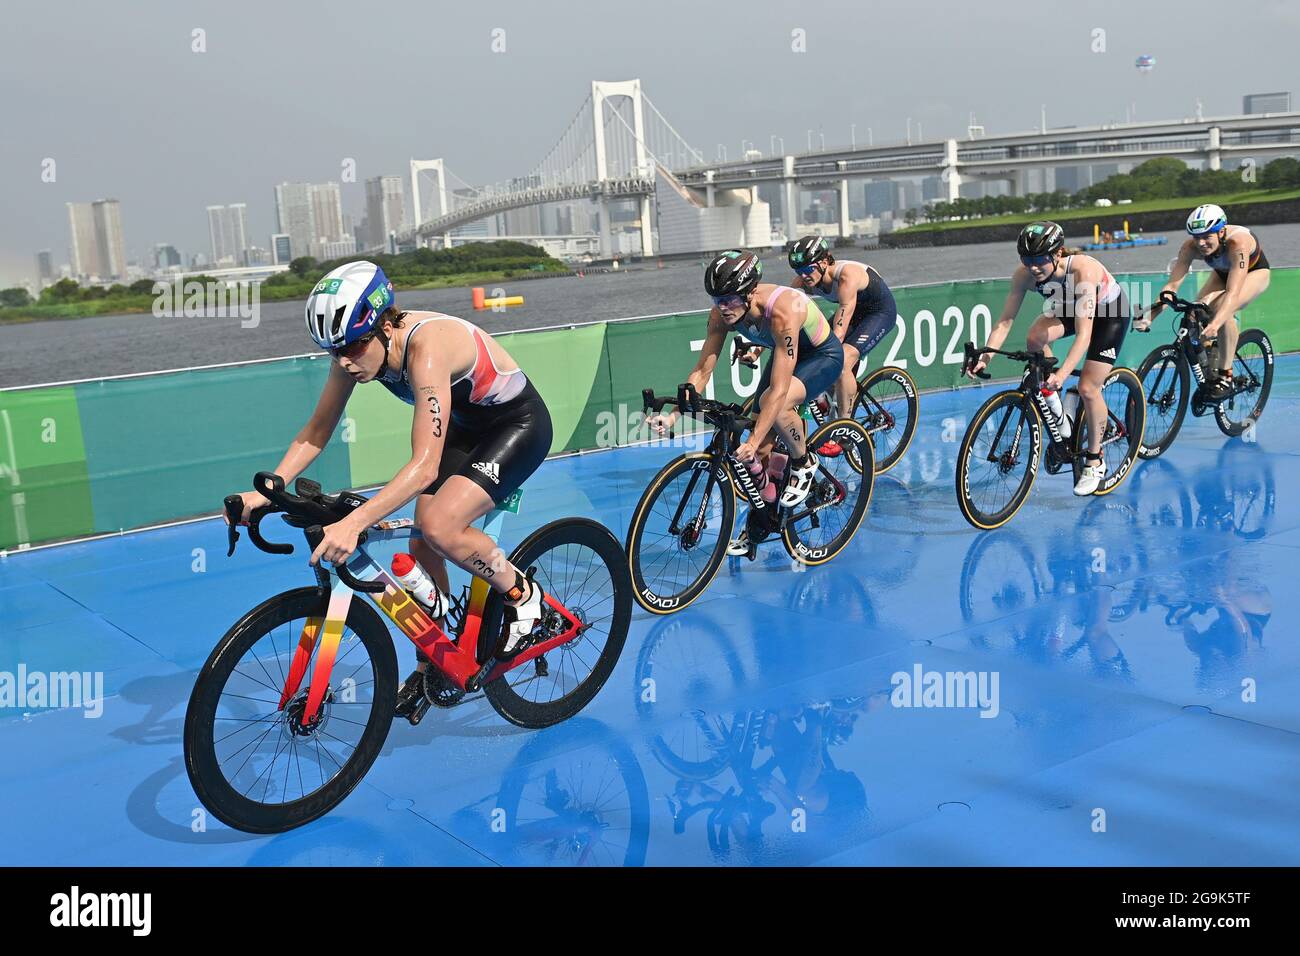 Tokyo, Japan. 27th July 2021. from left: Jessica LEARMONTH (GBR), Flora DUFFY (BER) on the bike, cycling in front of the Rainbow Bridge, action, triathlon women, women on 07/27/2021, Odaiba Marine Park Olympic Summer Games 2020, from 07/23 to 17/19/2021. - 08.08.2021 in Tokyo/Japan. Credit: dpa picture alliance/Alamy Live News Stock Photo